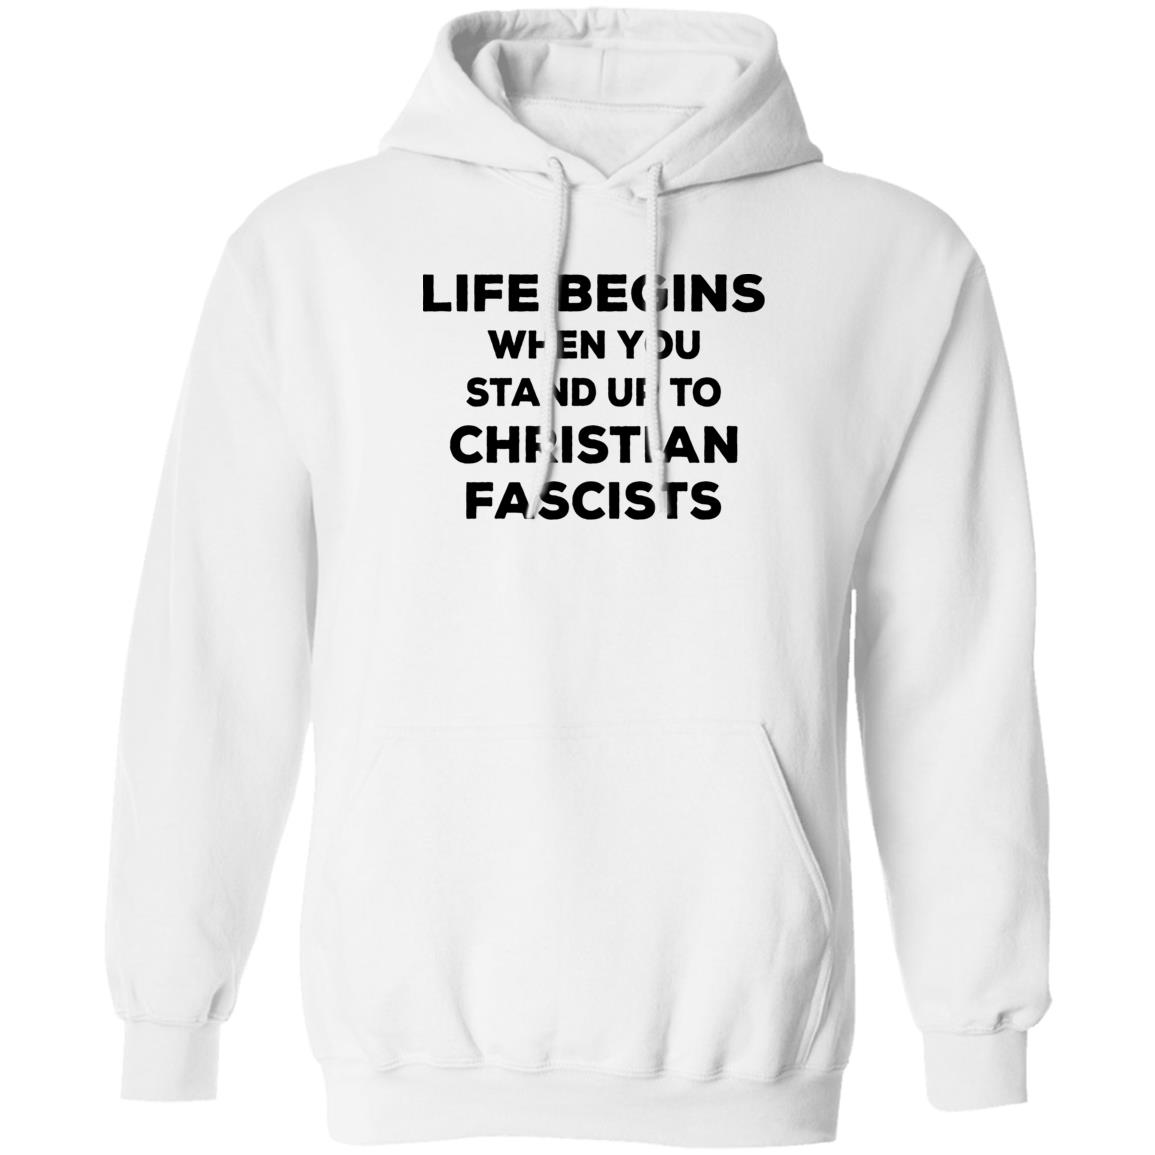 Life Begins When You Stand Up To Christian Fascists Shirt 2